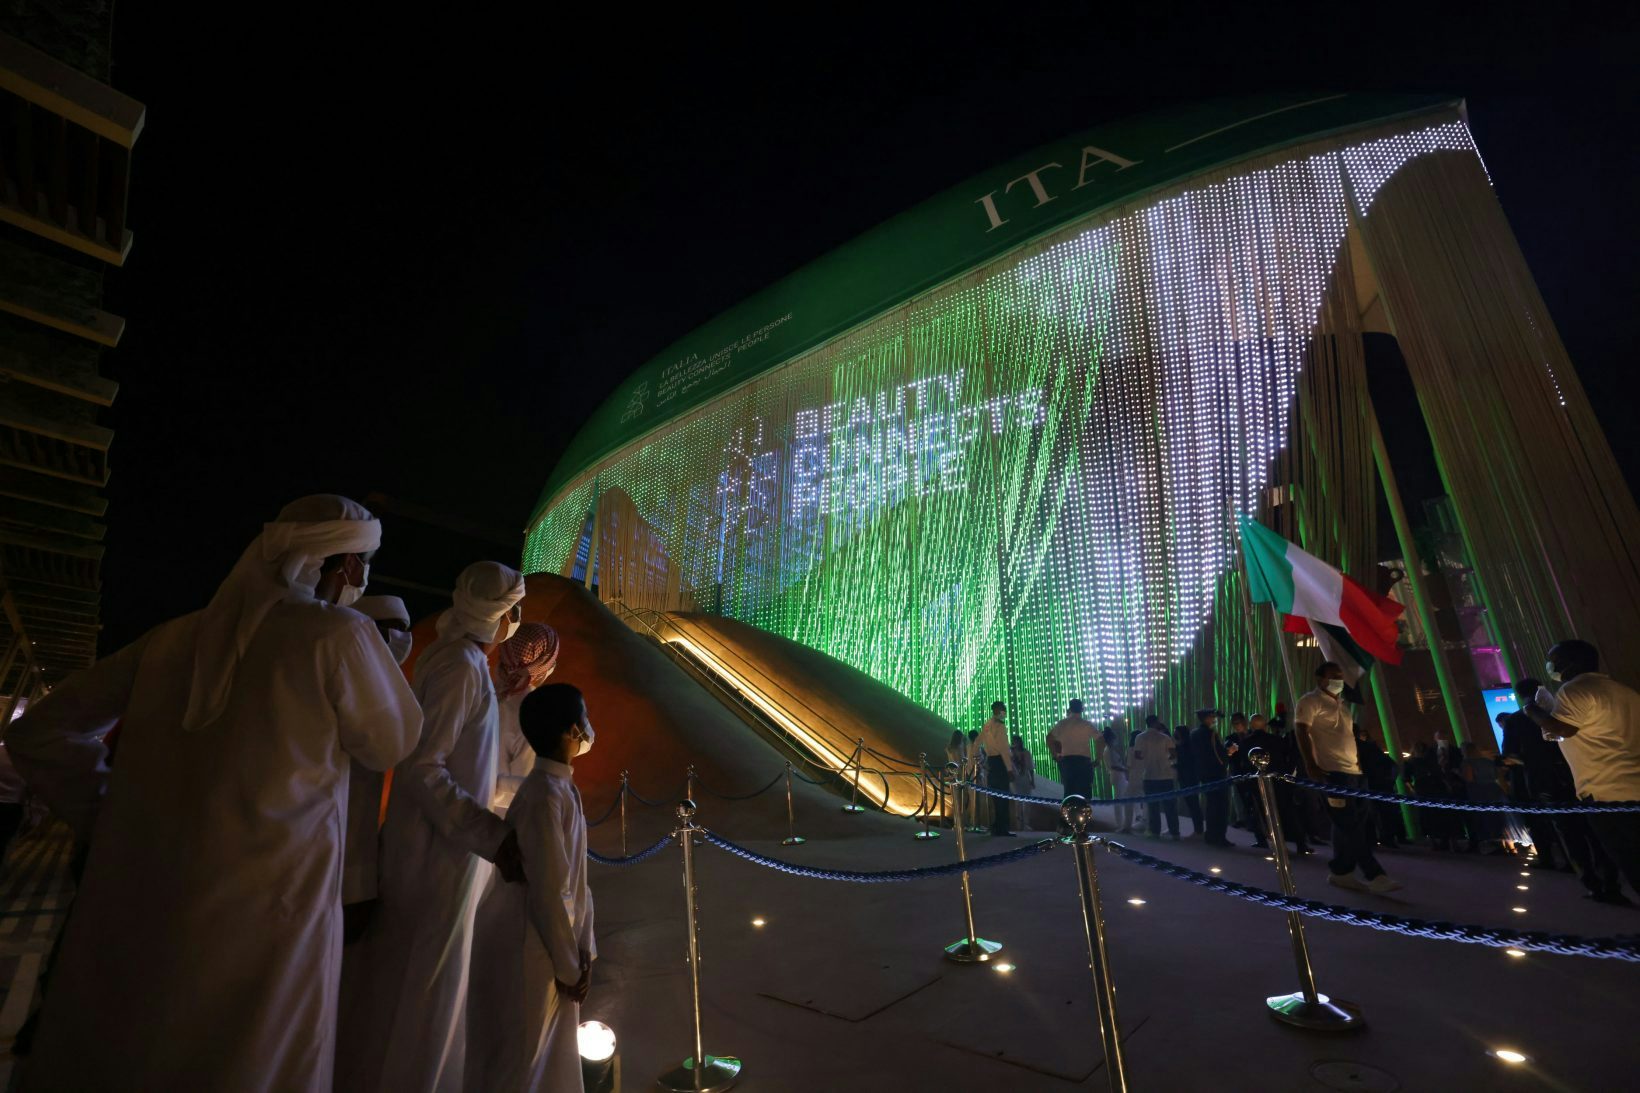 More than eight million visitors at the Expo 2020 Dubai.